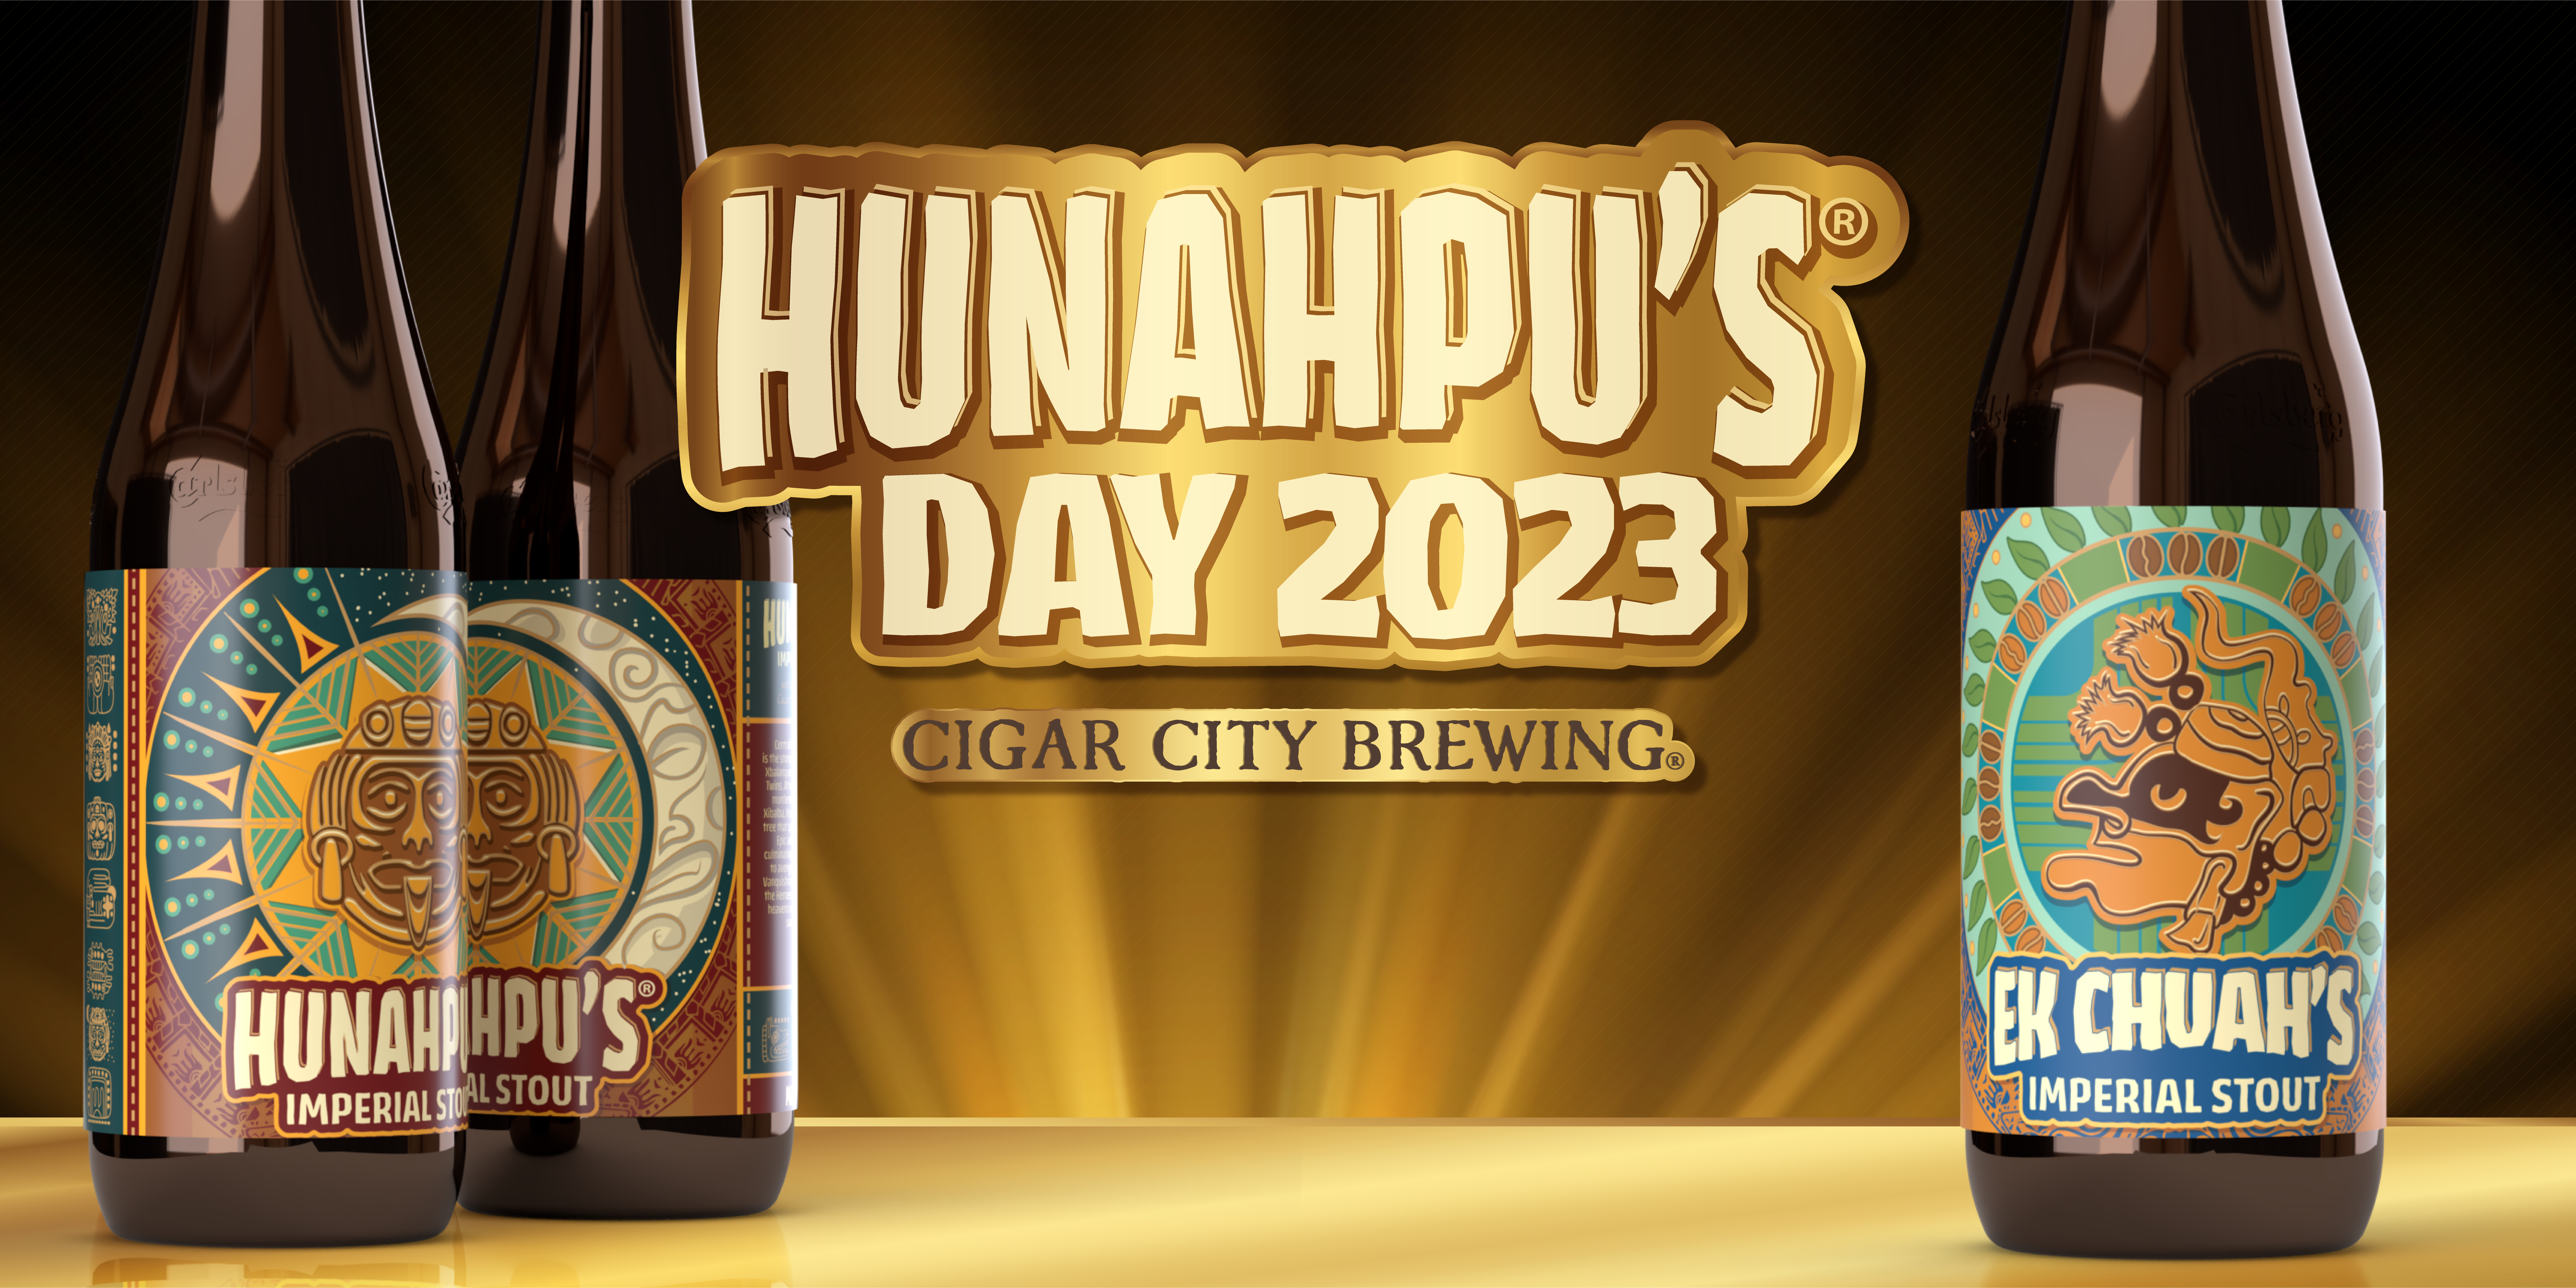 Bottles of Hunahpu's Imperial Stout 2023 next to a bottle of 2023 Ek Chuah's Imperial Stout with text that says Hunahpu's Day 2023 and Cigar City Brewing.